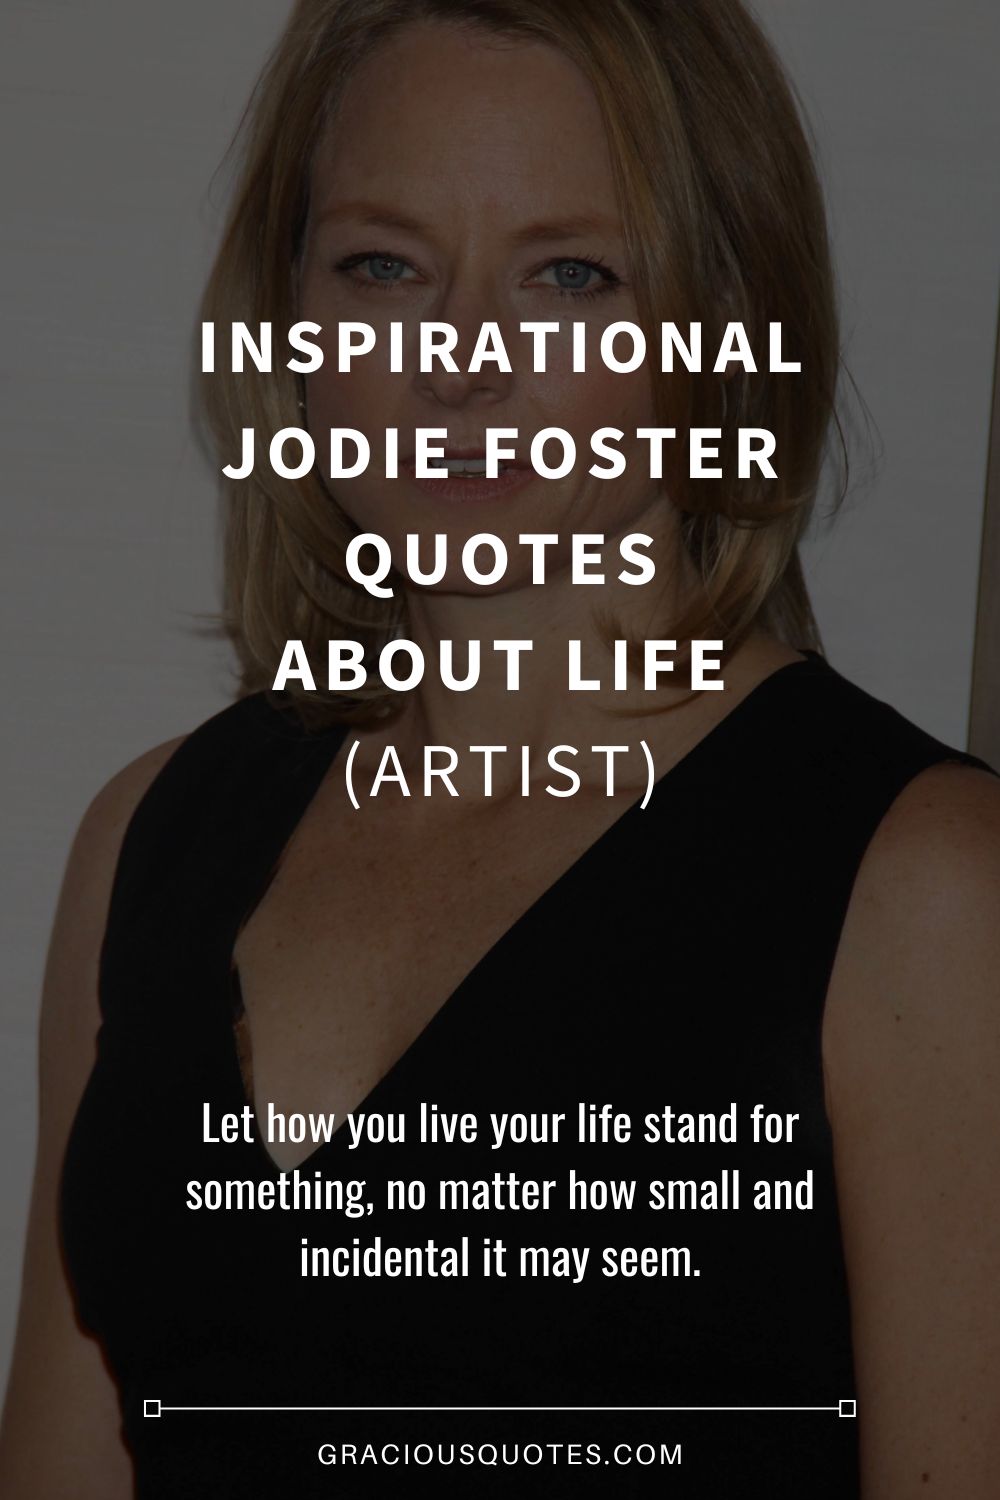 Inspirational Jodie Foster Quotes About Life (ARTIST) - Gracious Quotes